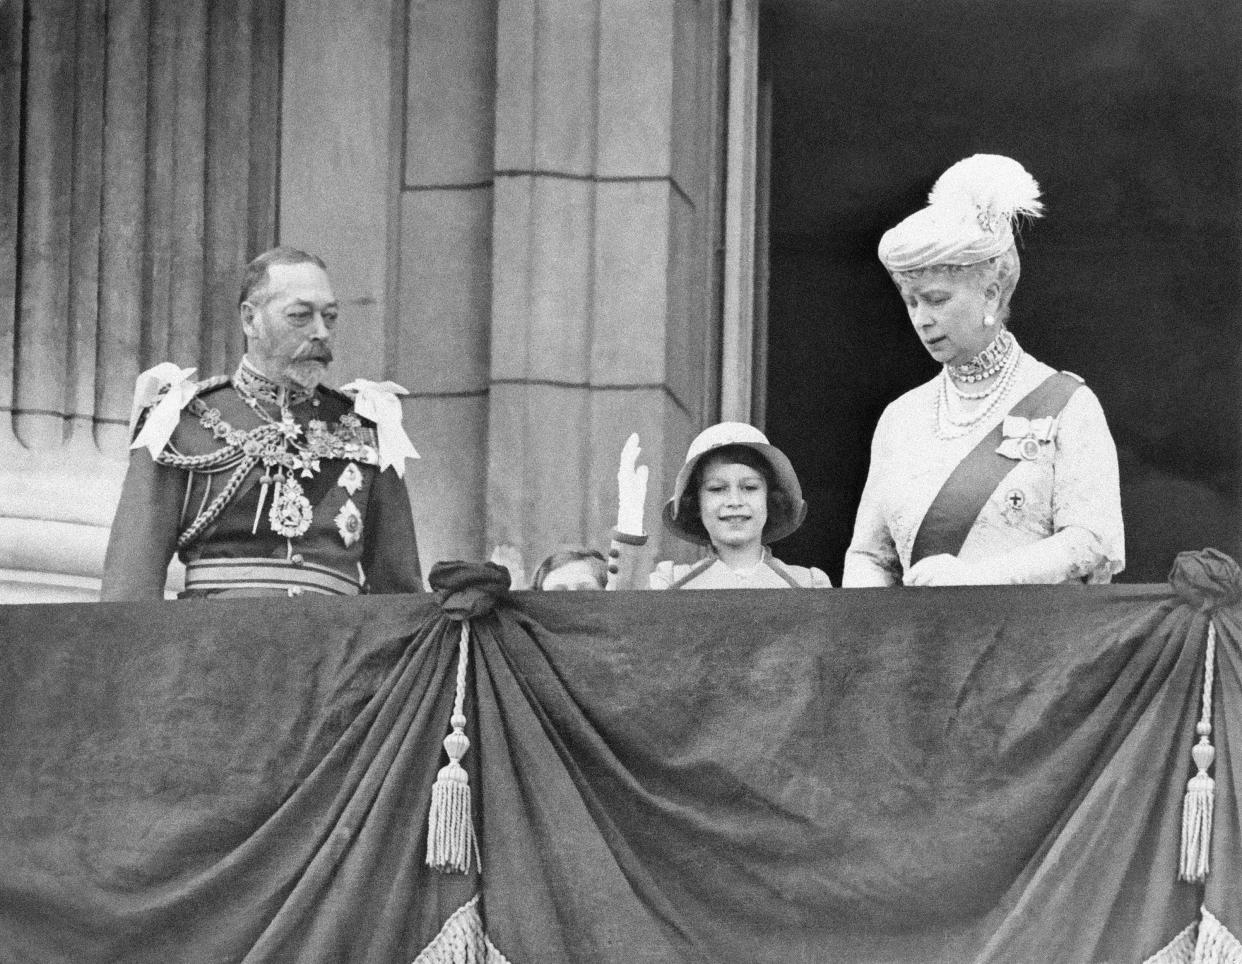 King George V, Princess Elizabeth waving to crowd, and Her Majesty Queen Mary on the balcony of Buckingham Palace in London on May 6, 1935 after attending the Jubilee service at St. Paul's Cathedral. 